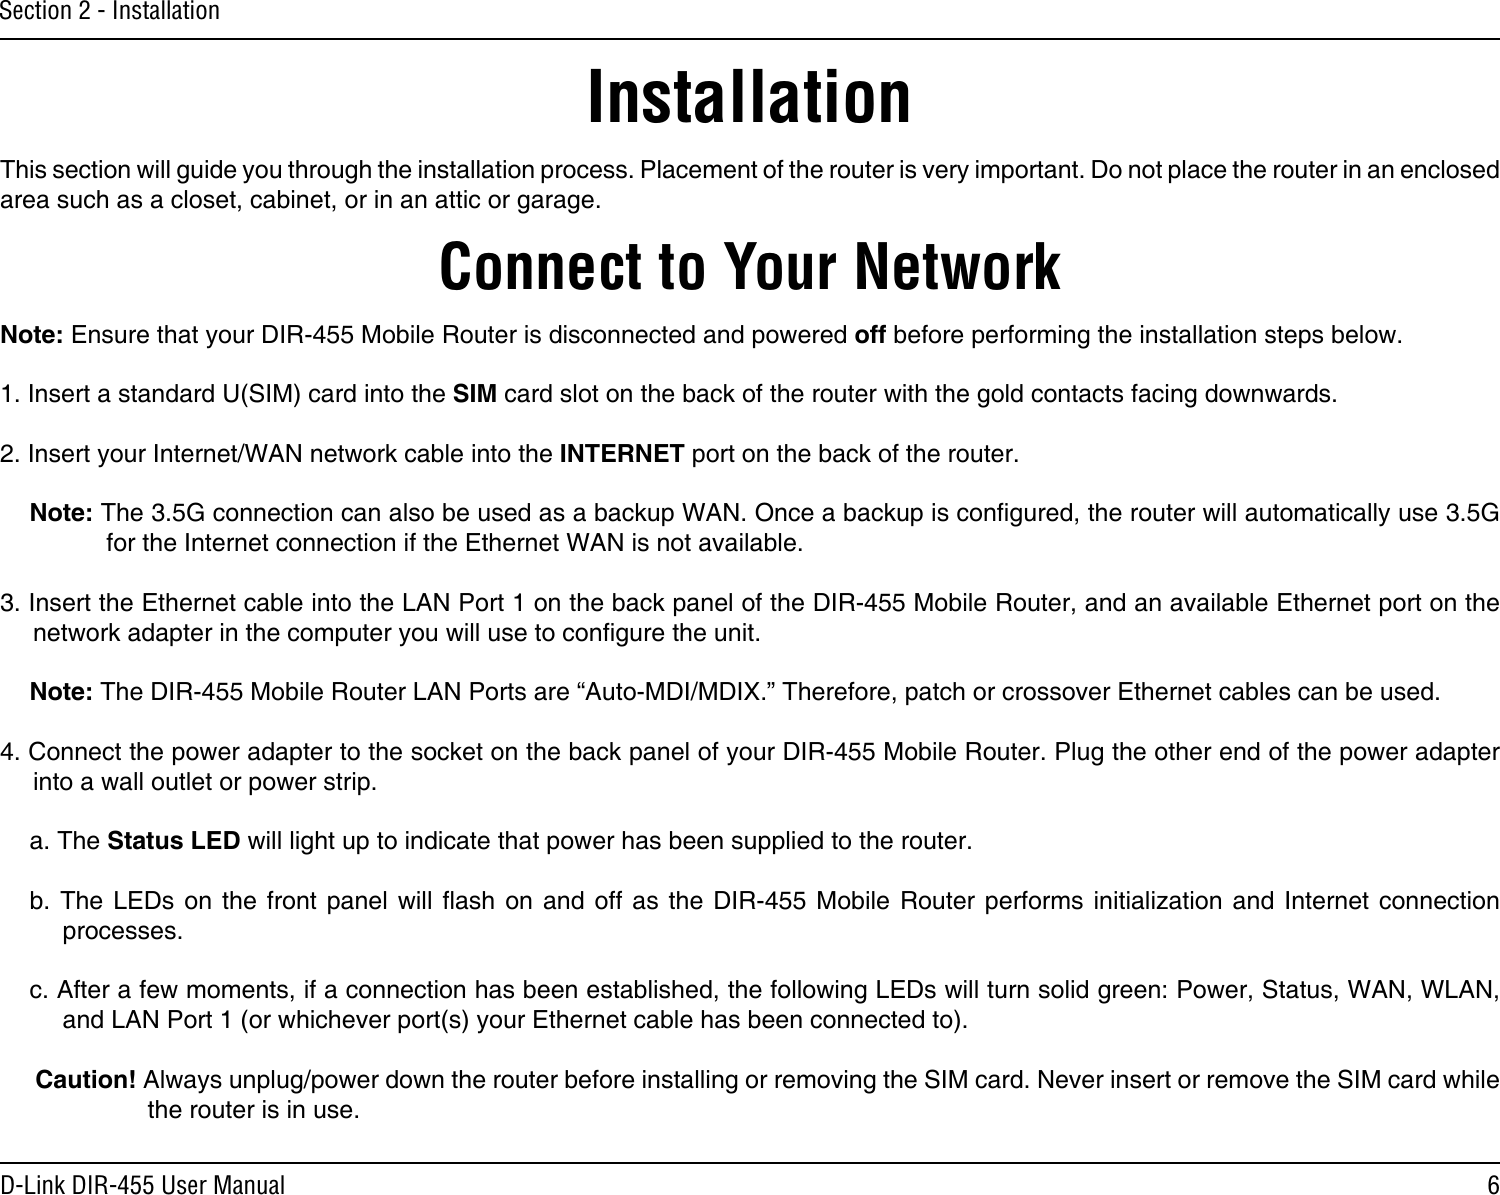 6D-Link DIR-455 User ManualSection 2 - InstallationConnect to Your NetworkInstallationThis section will guide you through the installation process. Placement of the router is very important. Do not place the router in an enclosed area such as a closet, cabinet, or in an attic or garage.Note: Ensure that your DIR-455 Mobile Router is disconnected and powered off before performing the installation steps below.1. Insert a standard U(SIM) card into the SIM card slot on the back of the router with the gold contacts facing downwards.2. Insert your Internet/WAN network cable into the INTERNET port on the back of the router.Note: The 3.5G connection can also be used as a backup WAN. Once a backup is congured, the router will automatically use 3.5G for the Internet connection if the Ethernet WAN is not available.3. Insert the Ethernet cable into the LAN Port 1 on the back panel of the DIR-455 Mobile Router, and an available Ethernet port on the network adapter in the computer you will use to congure the unit.Note: The DIR-455 Mobile Router LAN Ports are “Auto-MDI/MDIX.” Therefore, patch or crossover Ethernet cables can be used.4. Connect the power adapter to the socket on the back panel of your DIR-455 Mobile Router. Plug the other end of the power adapter into a wall outlet or power strip.a. The Status LED will light up to indicate that power has been supplied to the router.b. The LEDs on  the front  panel will  ash on  and off  as the  DIR-455 Mobile  Router performs  initialization  and  Internet  connection processes.c. After a few moments, if a connection has been established, the following LEDs will turn solid green: Power, Status, WAN, WLAN, and LAN Port 1 (or whichever port(s) your Ethernet cable has been connected to).Caution! Always unplug/power down the router before installing or removing the SIM card. Never insert or remove the SIM card while the router is in use.